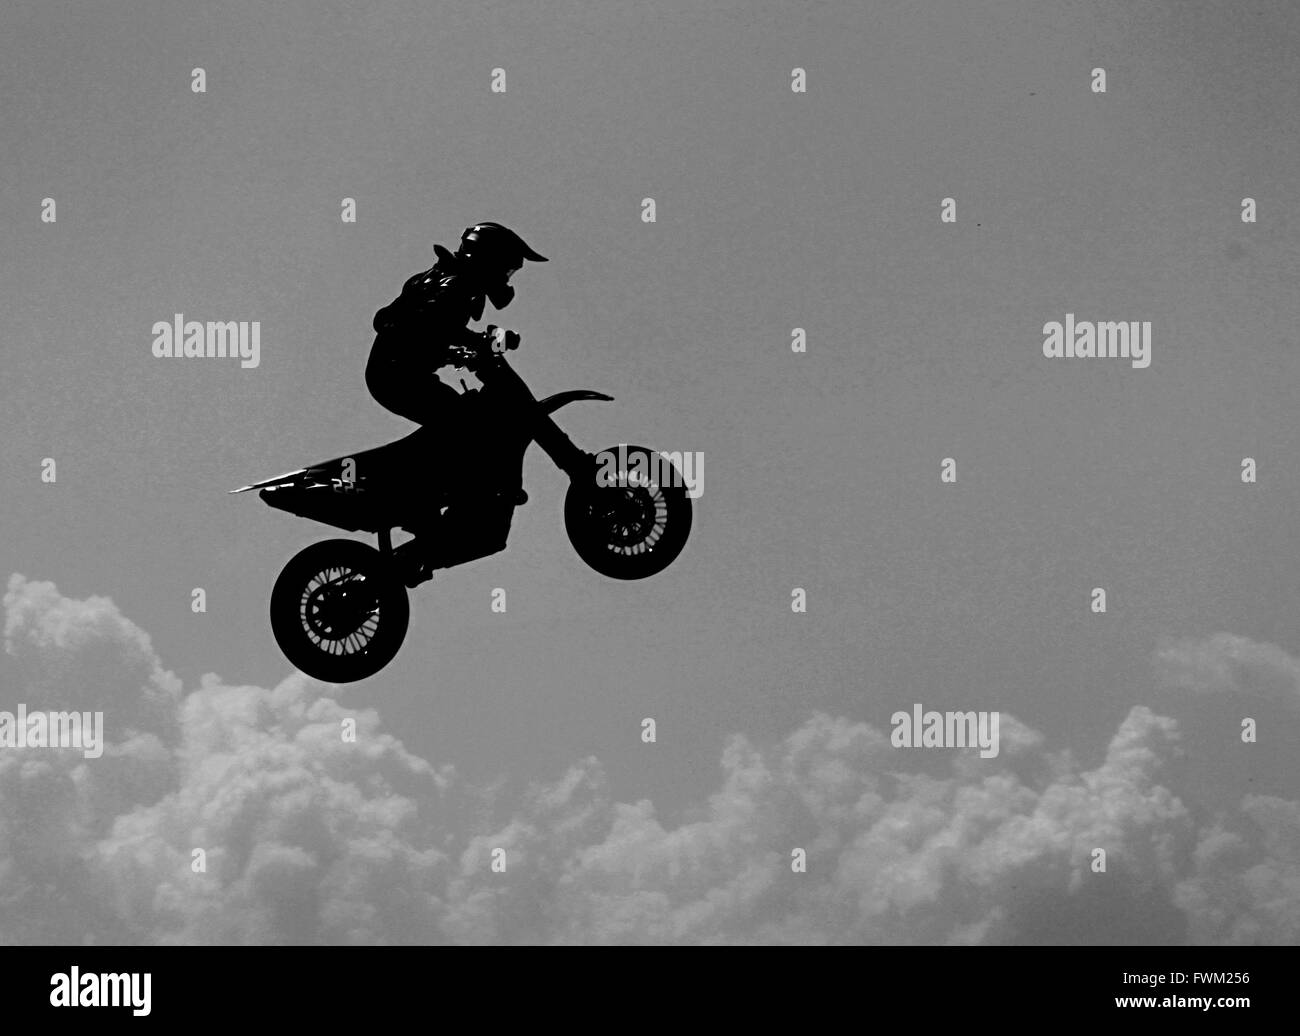 Side View Of Motocross Racer Performing Mid-Air Against Sky Stock Photo